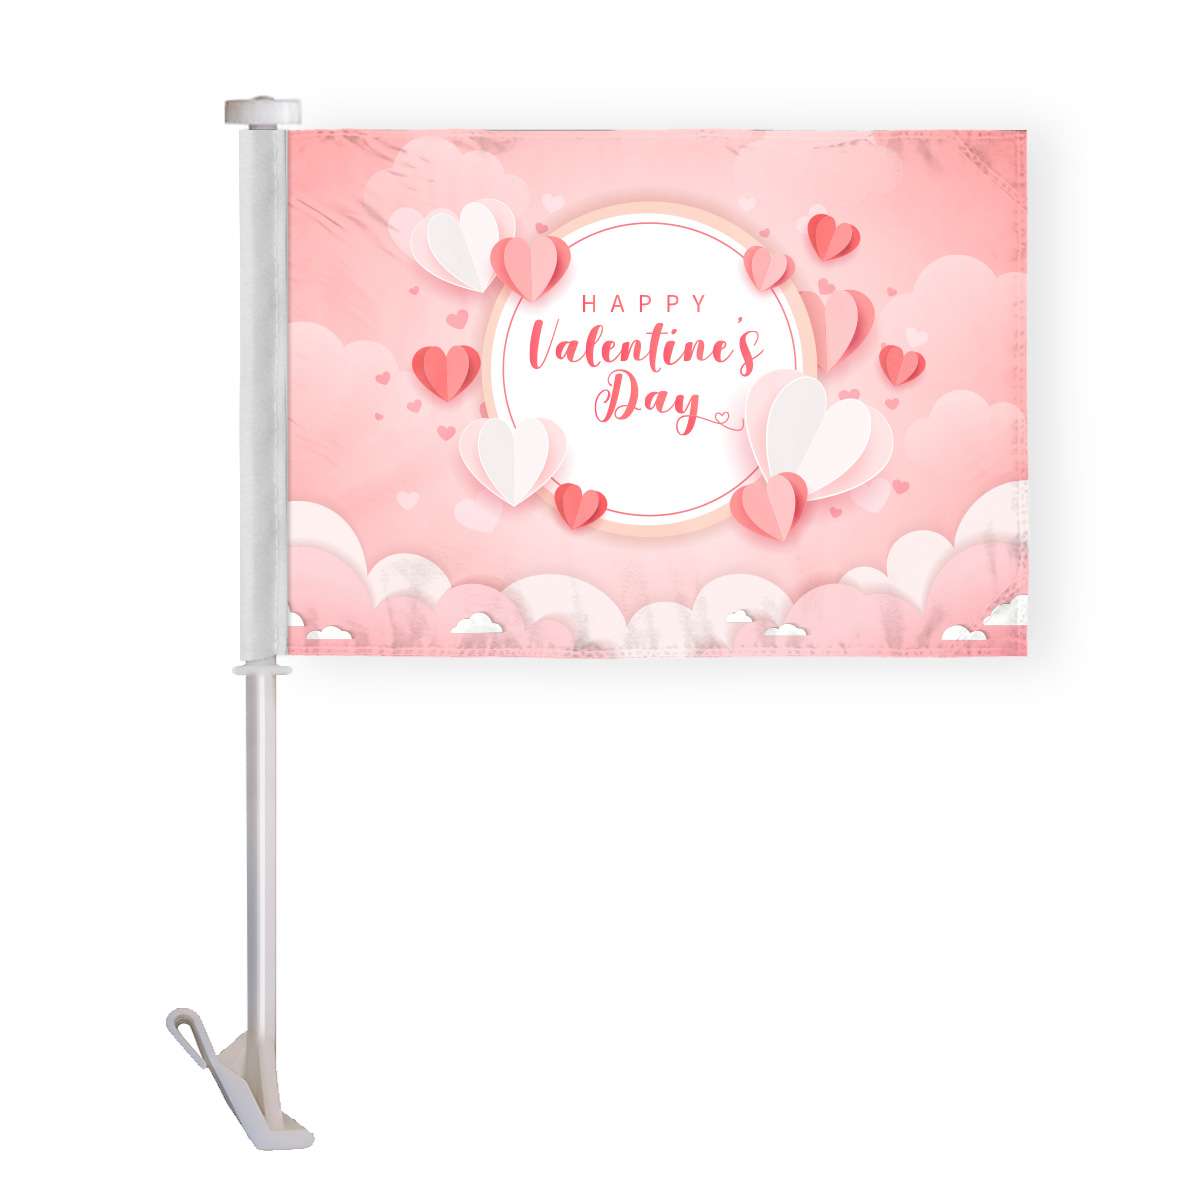 AGAS Happy Valentines Day Car Flag 10 x 15 Inches